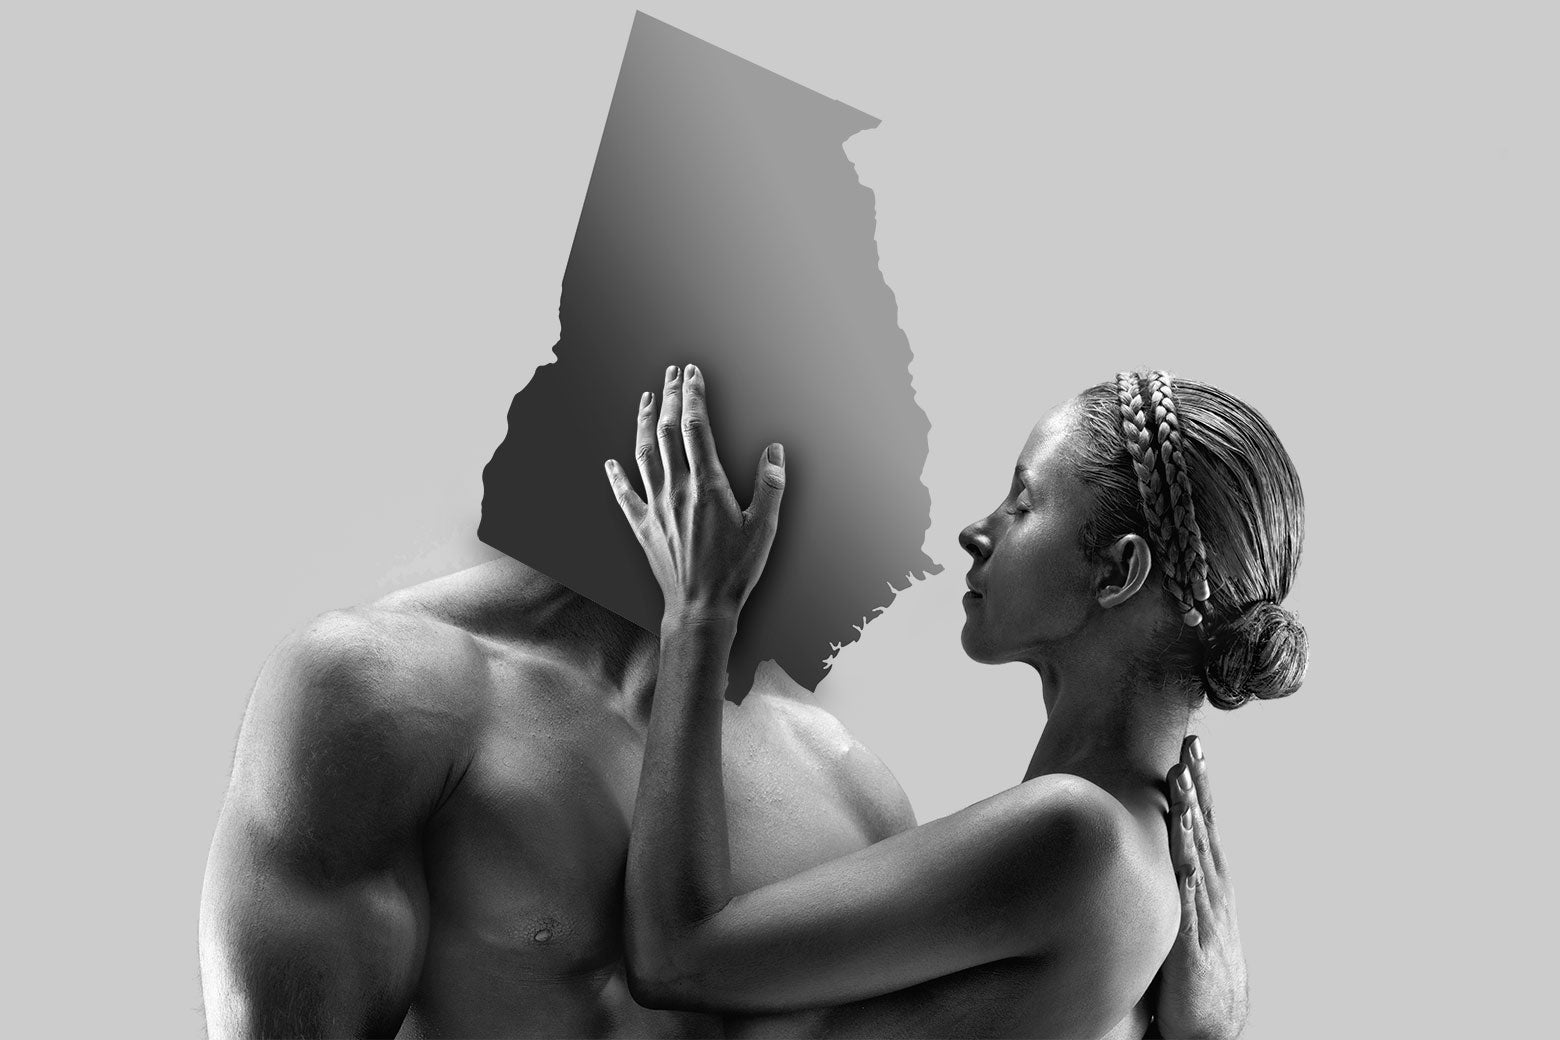 A cutout of the state of Georgia is superimposed over the head of a muscular, shirtless man. In his arms is a woman touching his face.